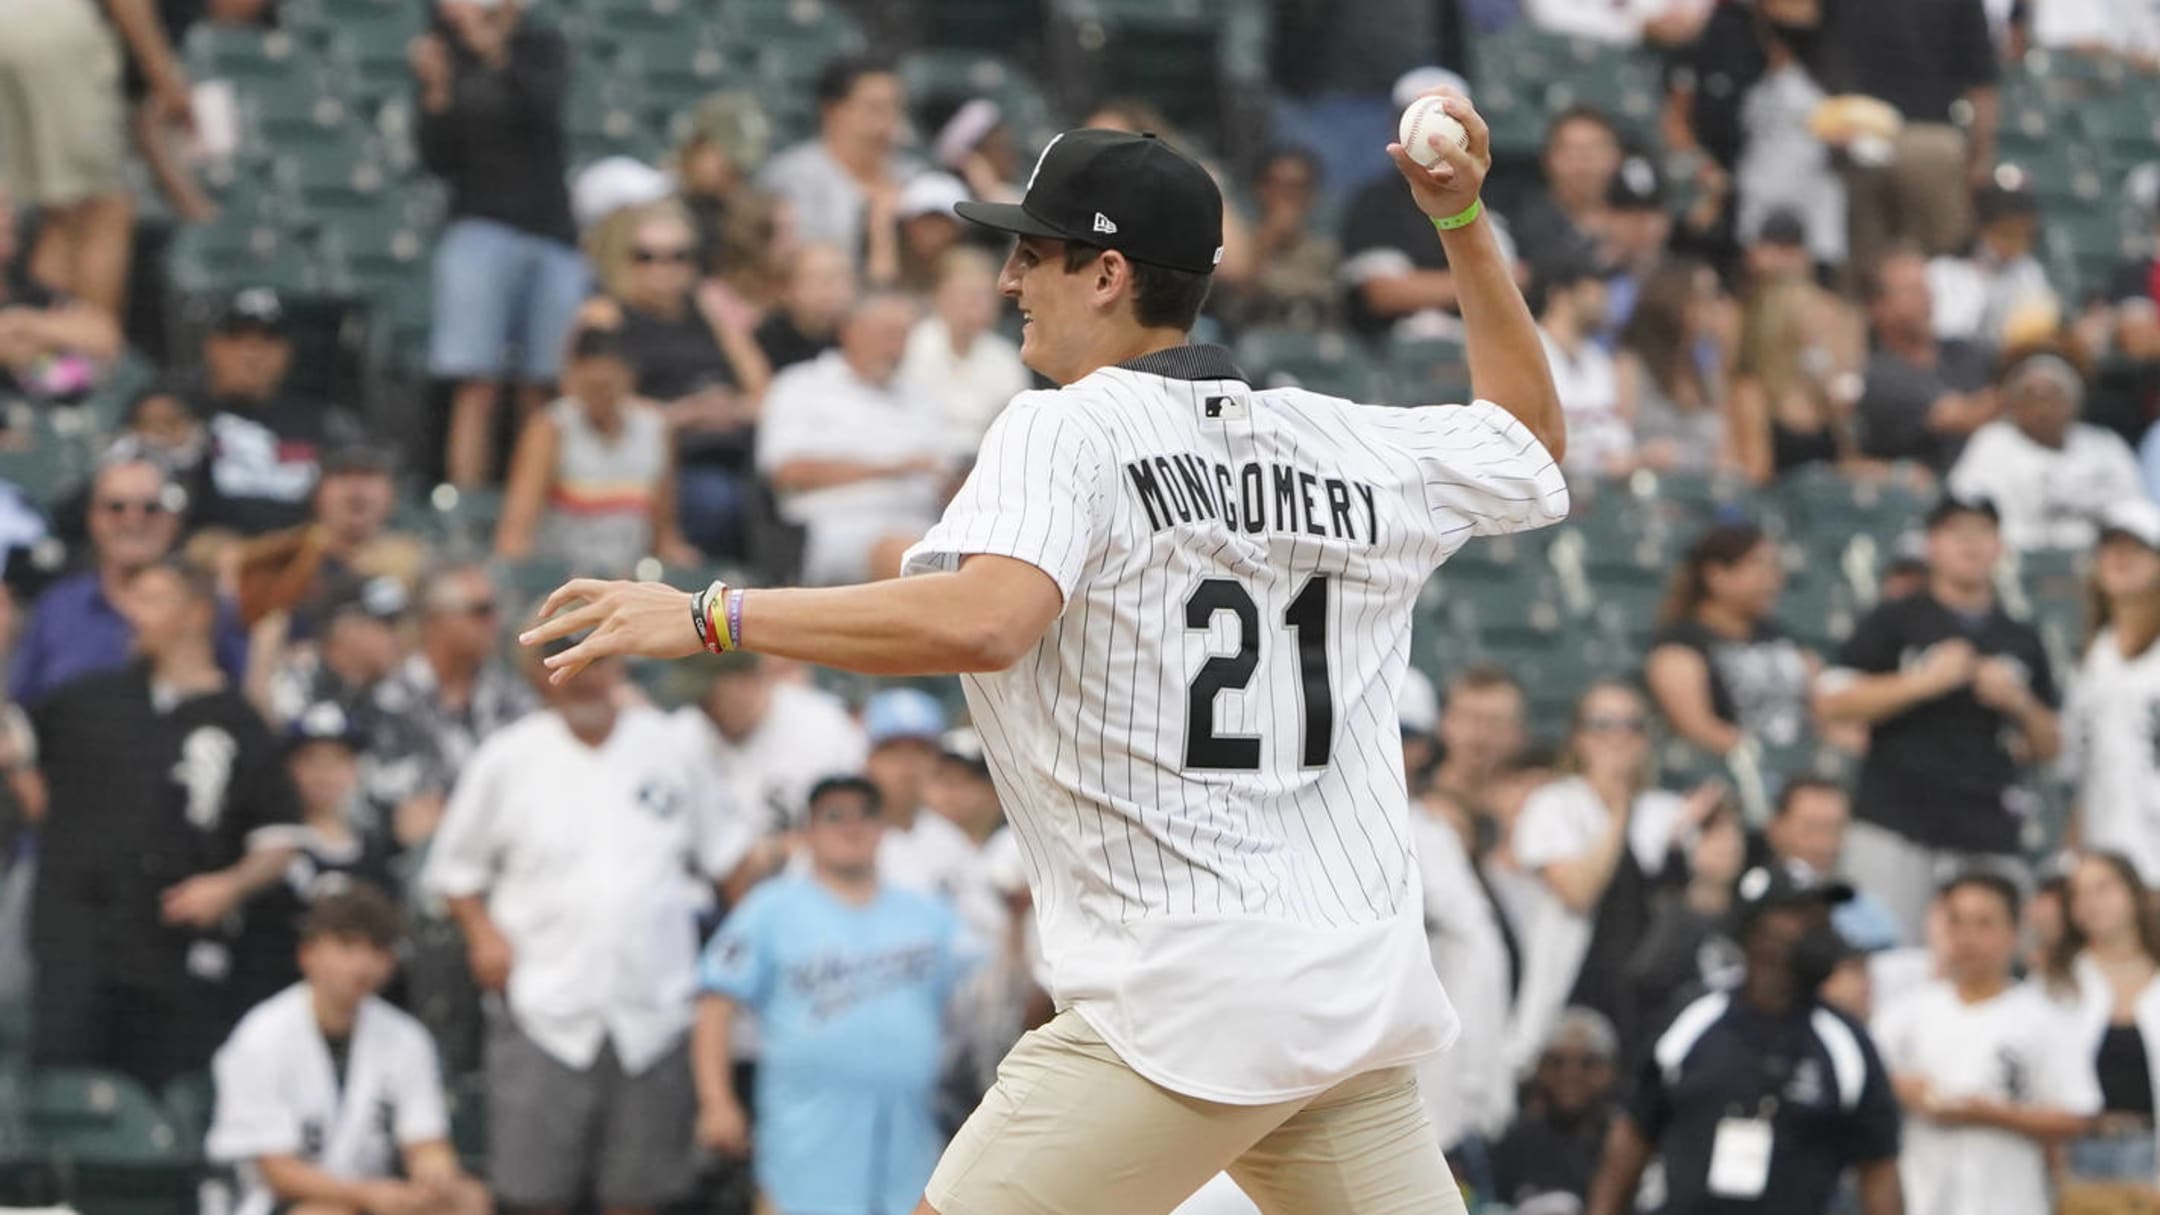 Chicago White Sox sign Colson Montgomery, their 1st-round pick in last  week's MLB draft